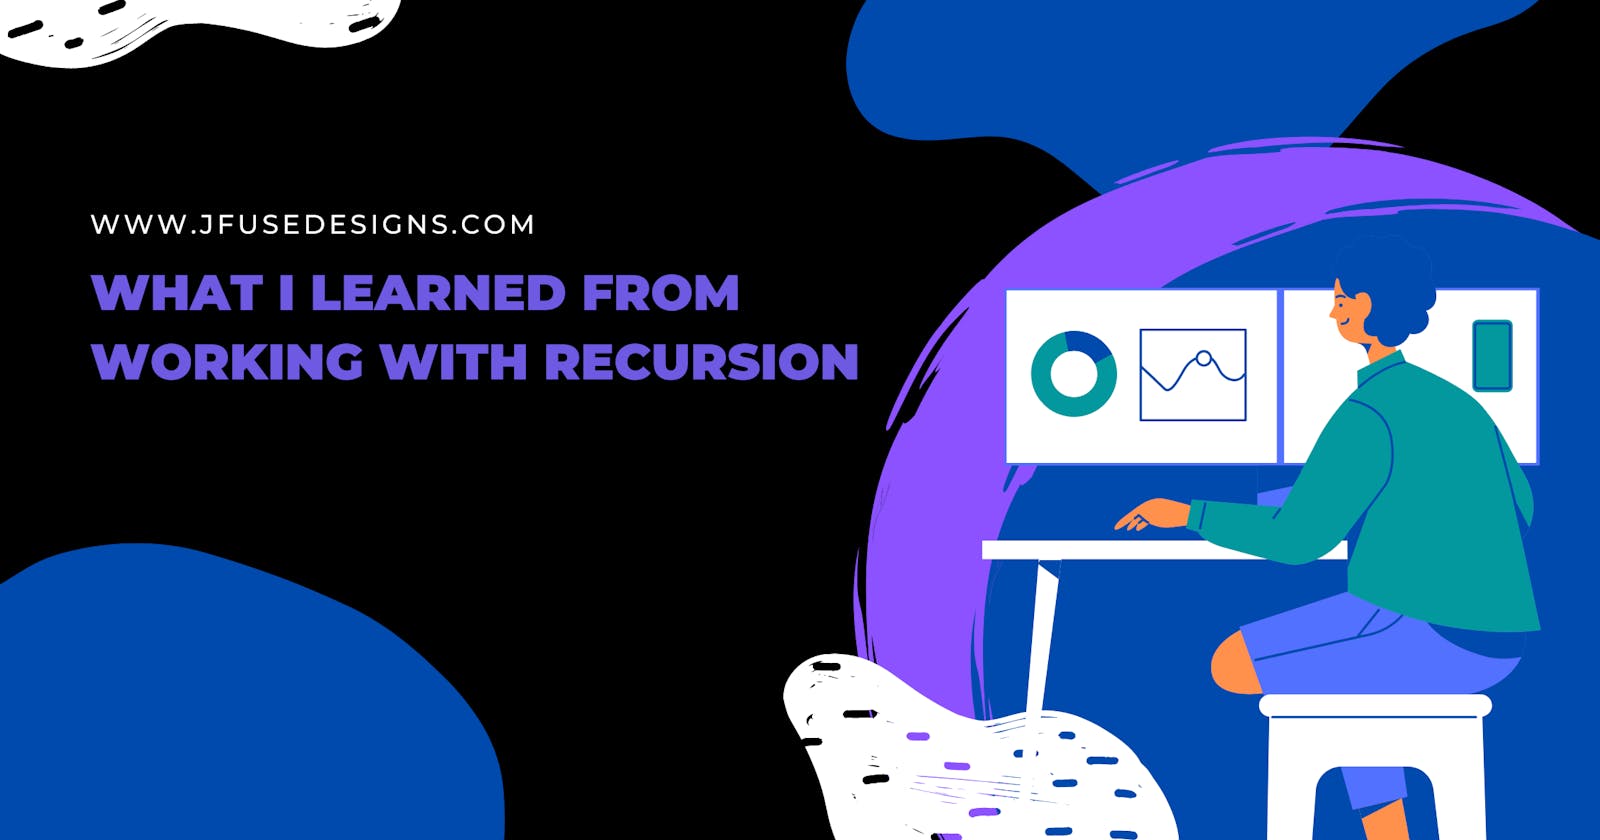 What I Learned from Working with Recursion